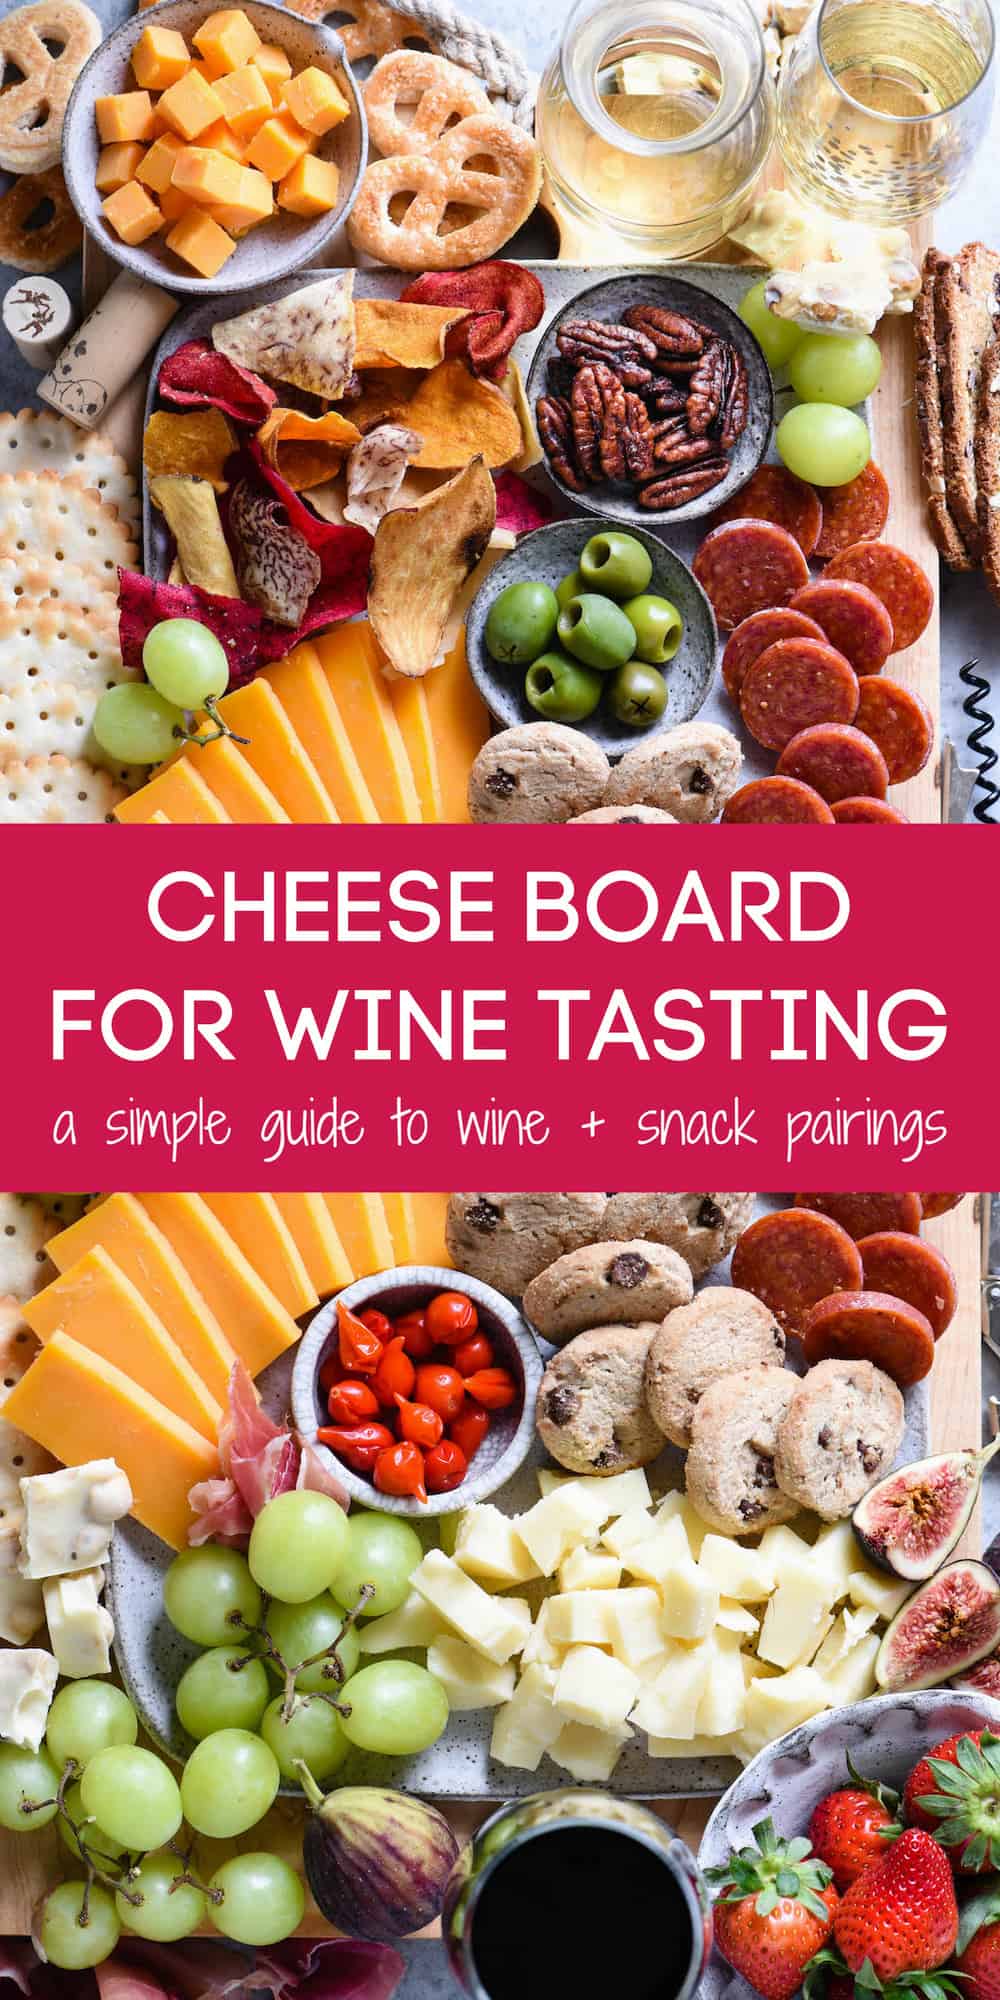 Making a cheese board for wine tasting? Follow this simple, down-to-earth guide to start pairing cheese, charcuterie and other snacks with wine! | foxeslovelemons.com